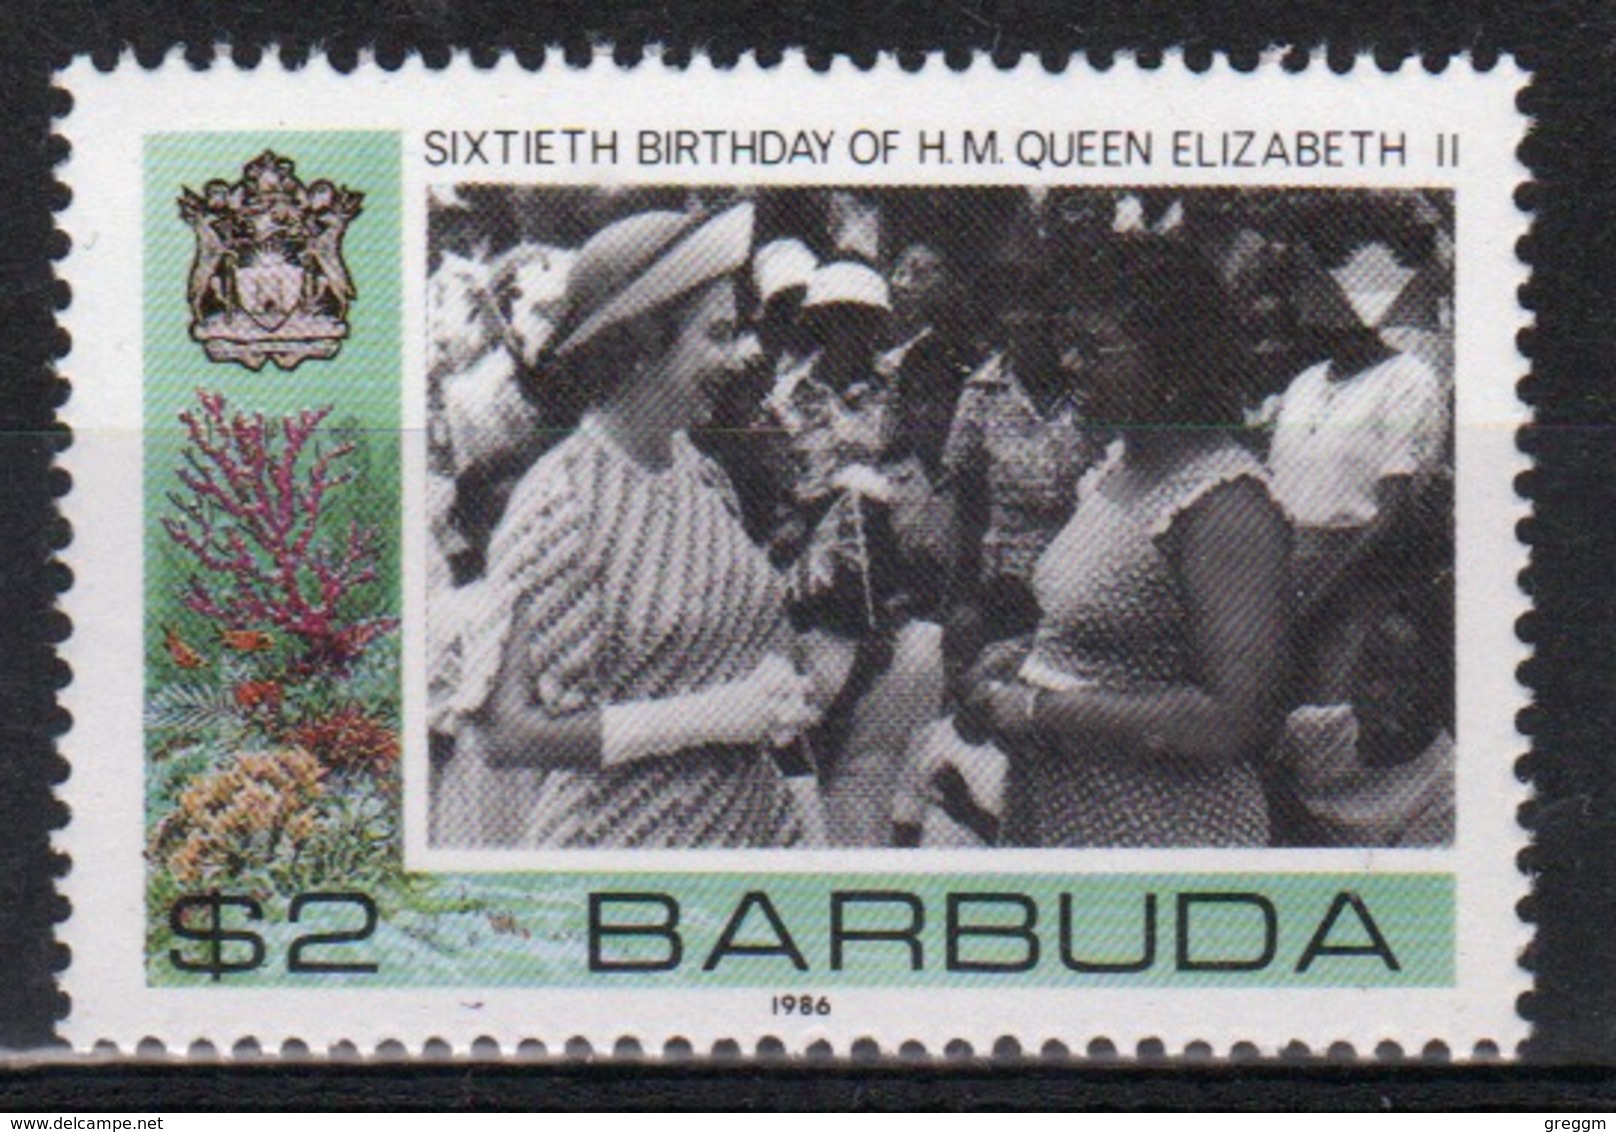 Barbuda 1986 Single $2 Stamp Celebrating The 60th Birthday Of The Queen. - Antigua And Barbuda (1981-...)